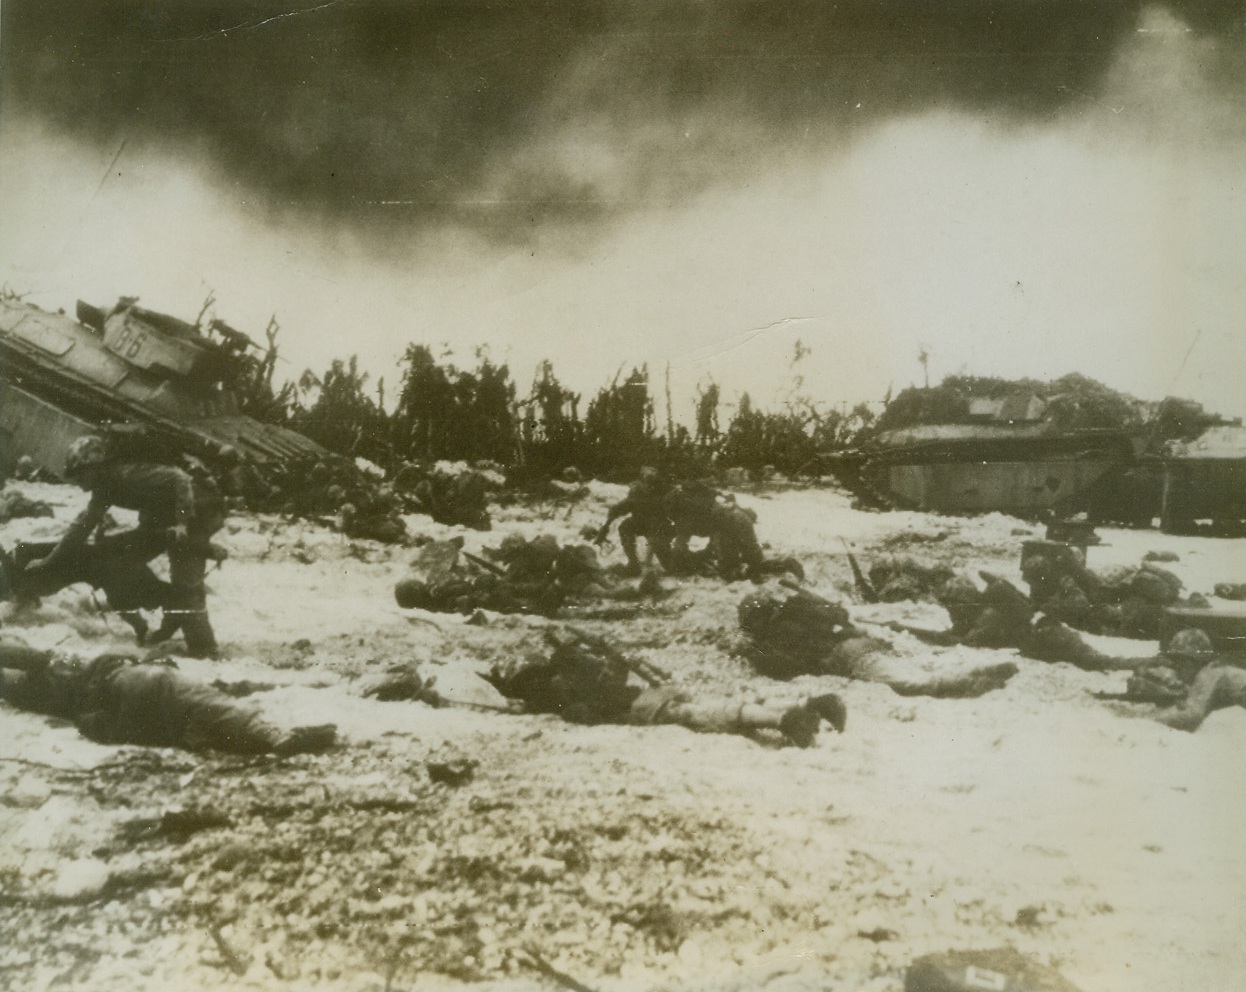 Marines Swarm Ashore on Peleliu Island, 9/20/1944. Peleliu Island – Assault troops of First Marine division hit Peleliu island beach – some never to rise again – as the established beachhead in Paulaus in toughest fighting of three invasions flanking Philippines.  Jap defenders fought grimly in retreat under pressure from ceaseless land, sea and air attack.  Photo radioed from Honolulu to San Francisco. Credit line (ACME);